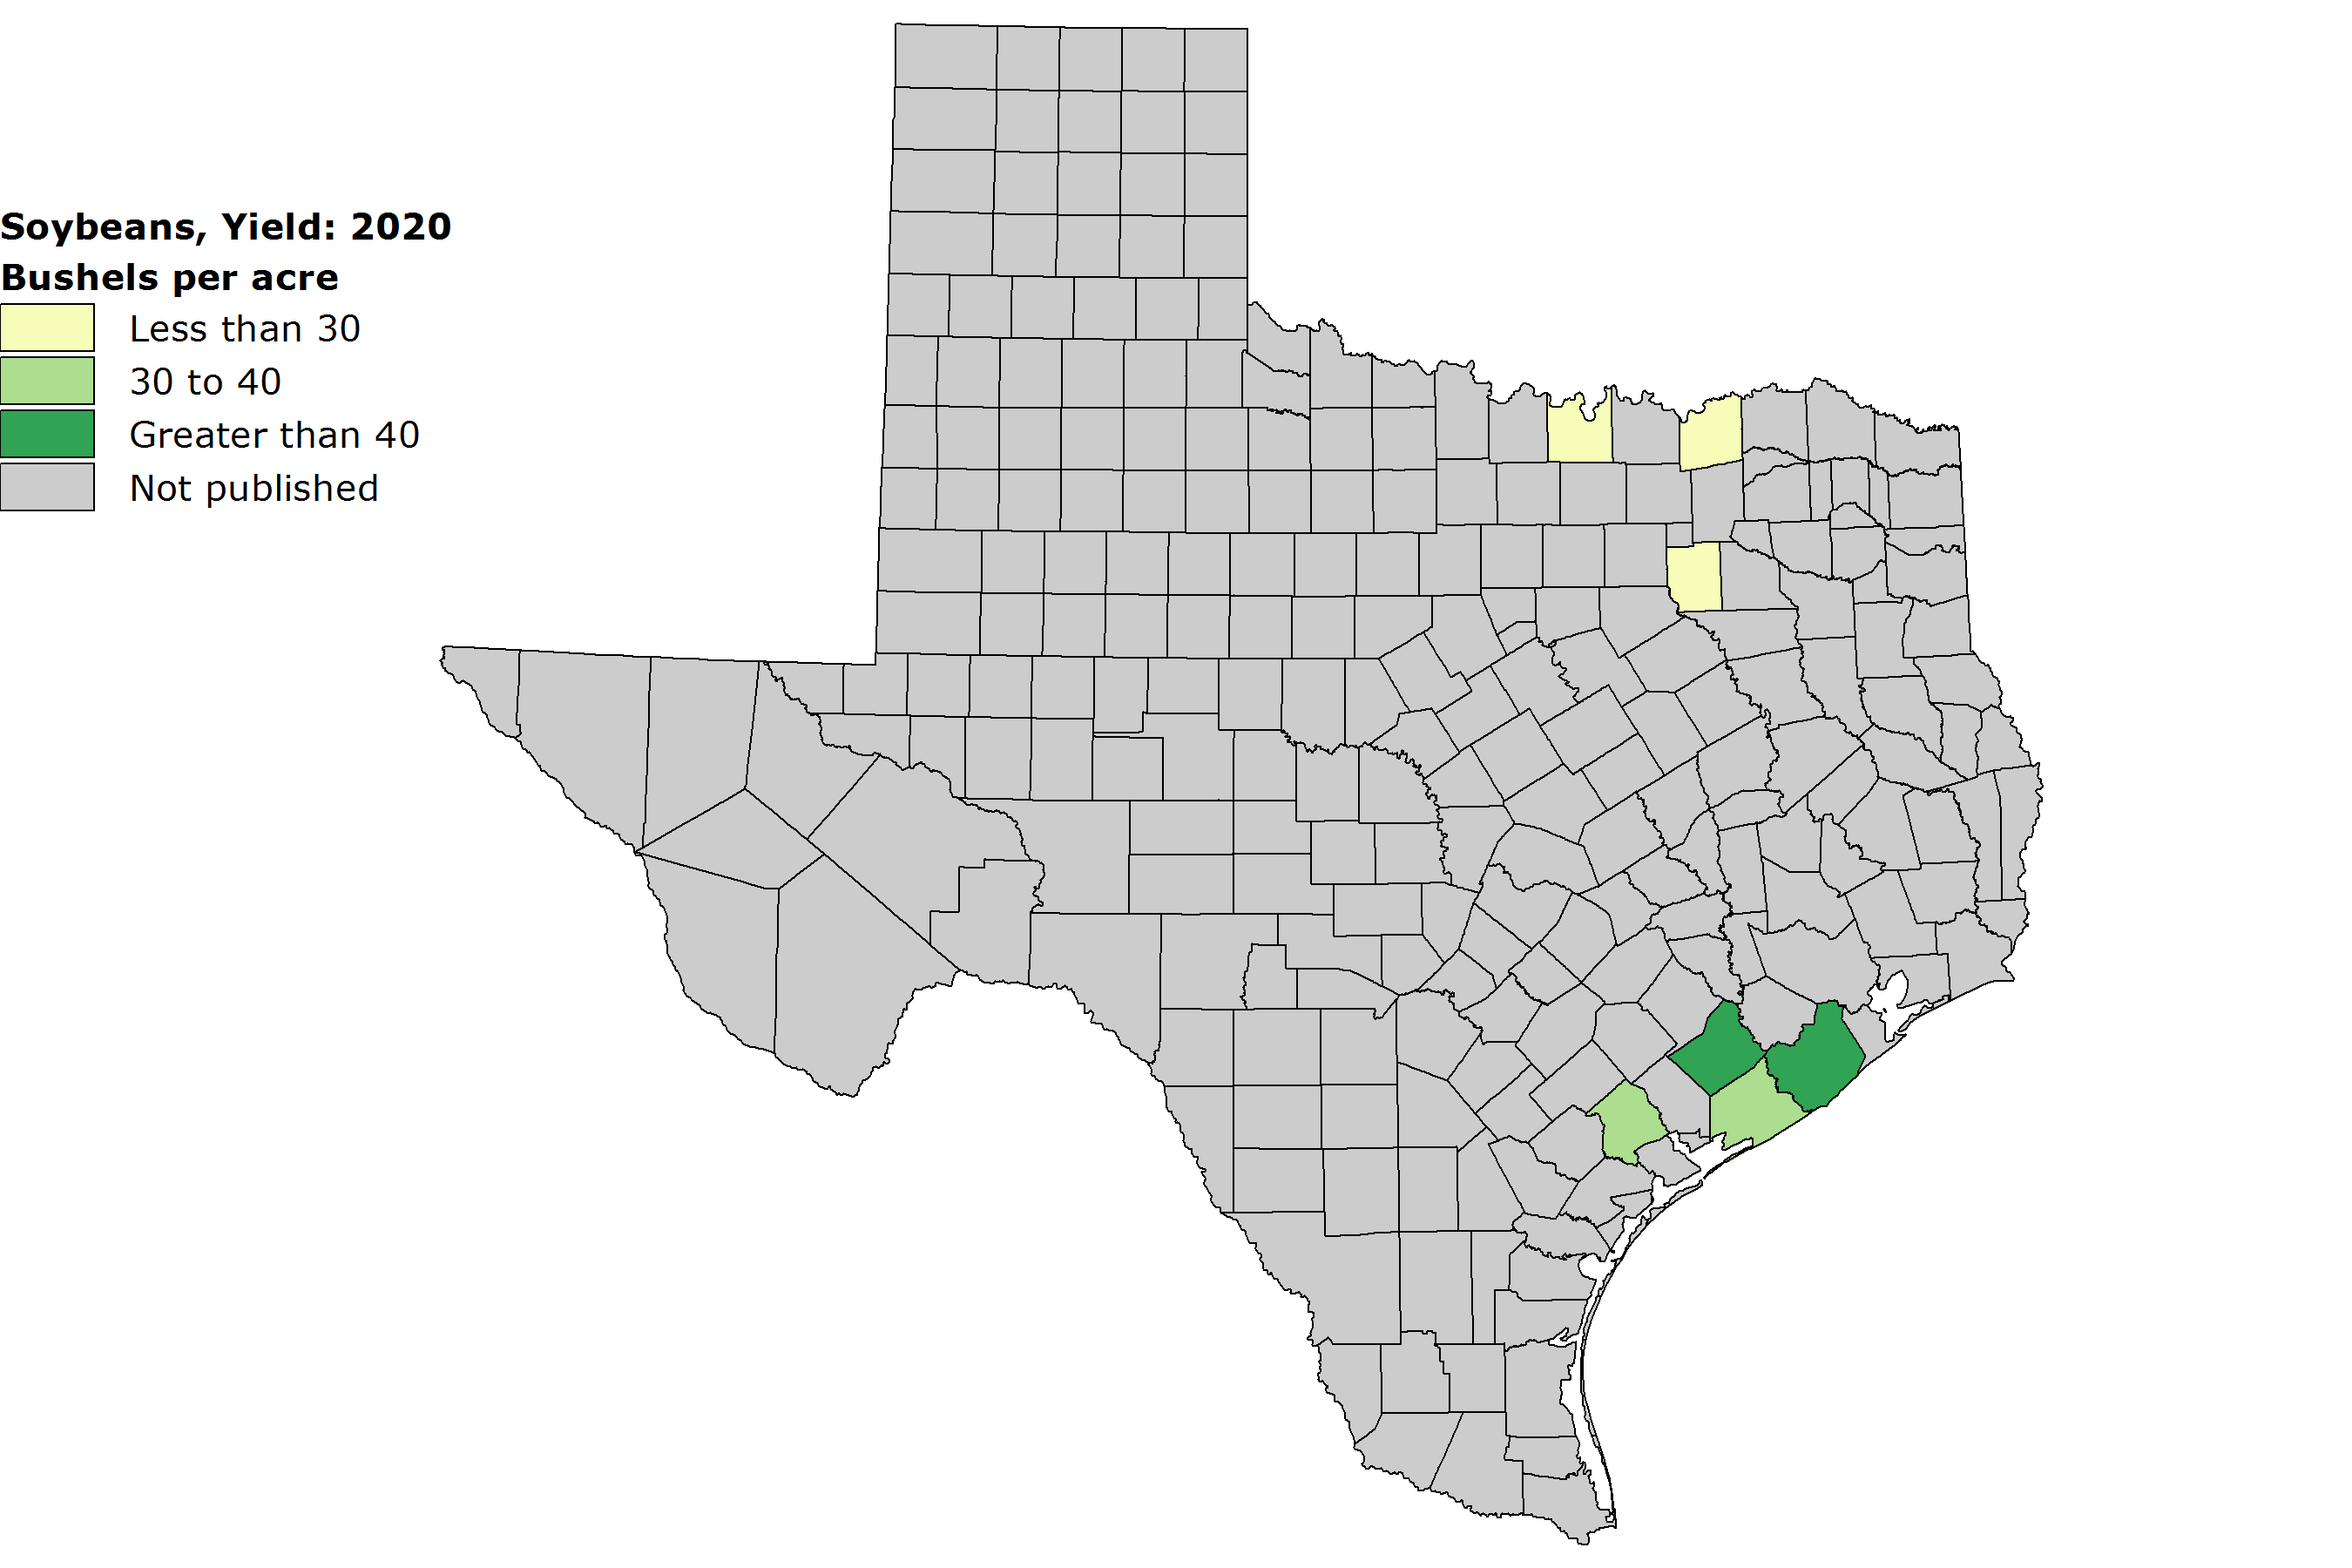 A shaded map of Texas showing the average yield of soybean bushels per acre by county.